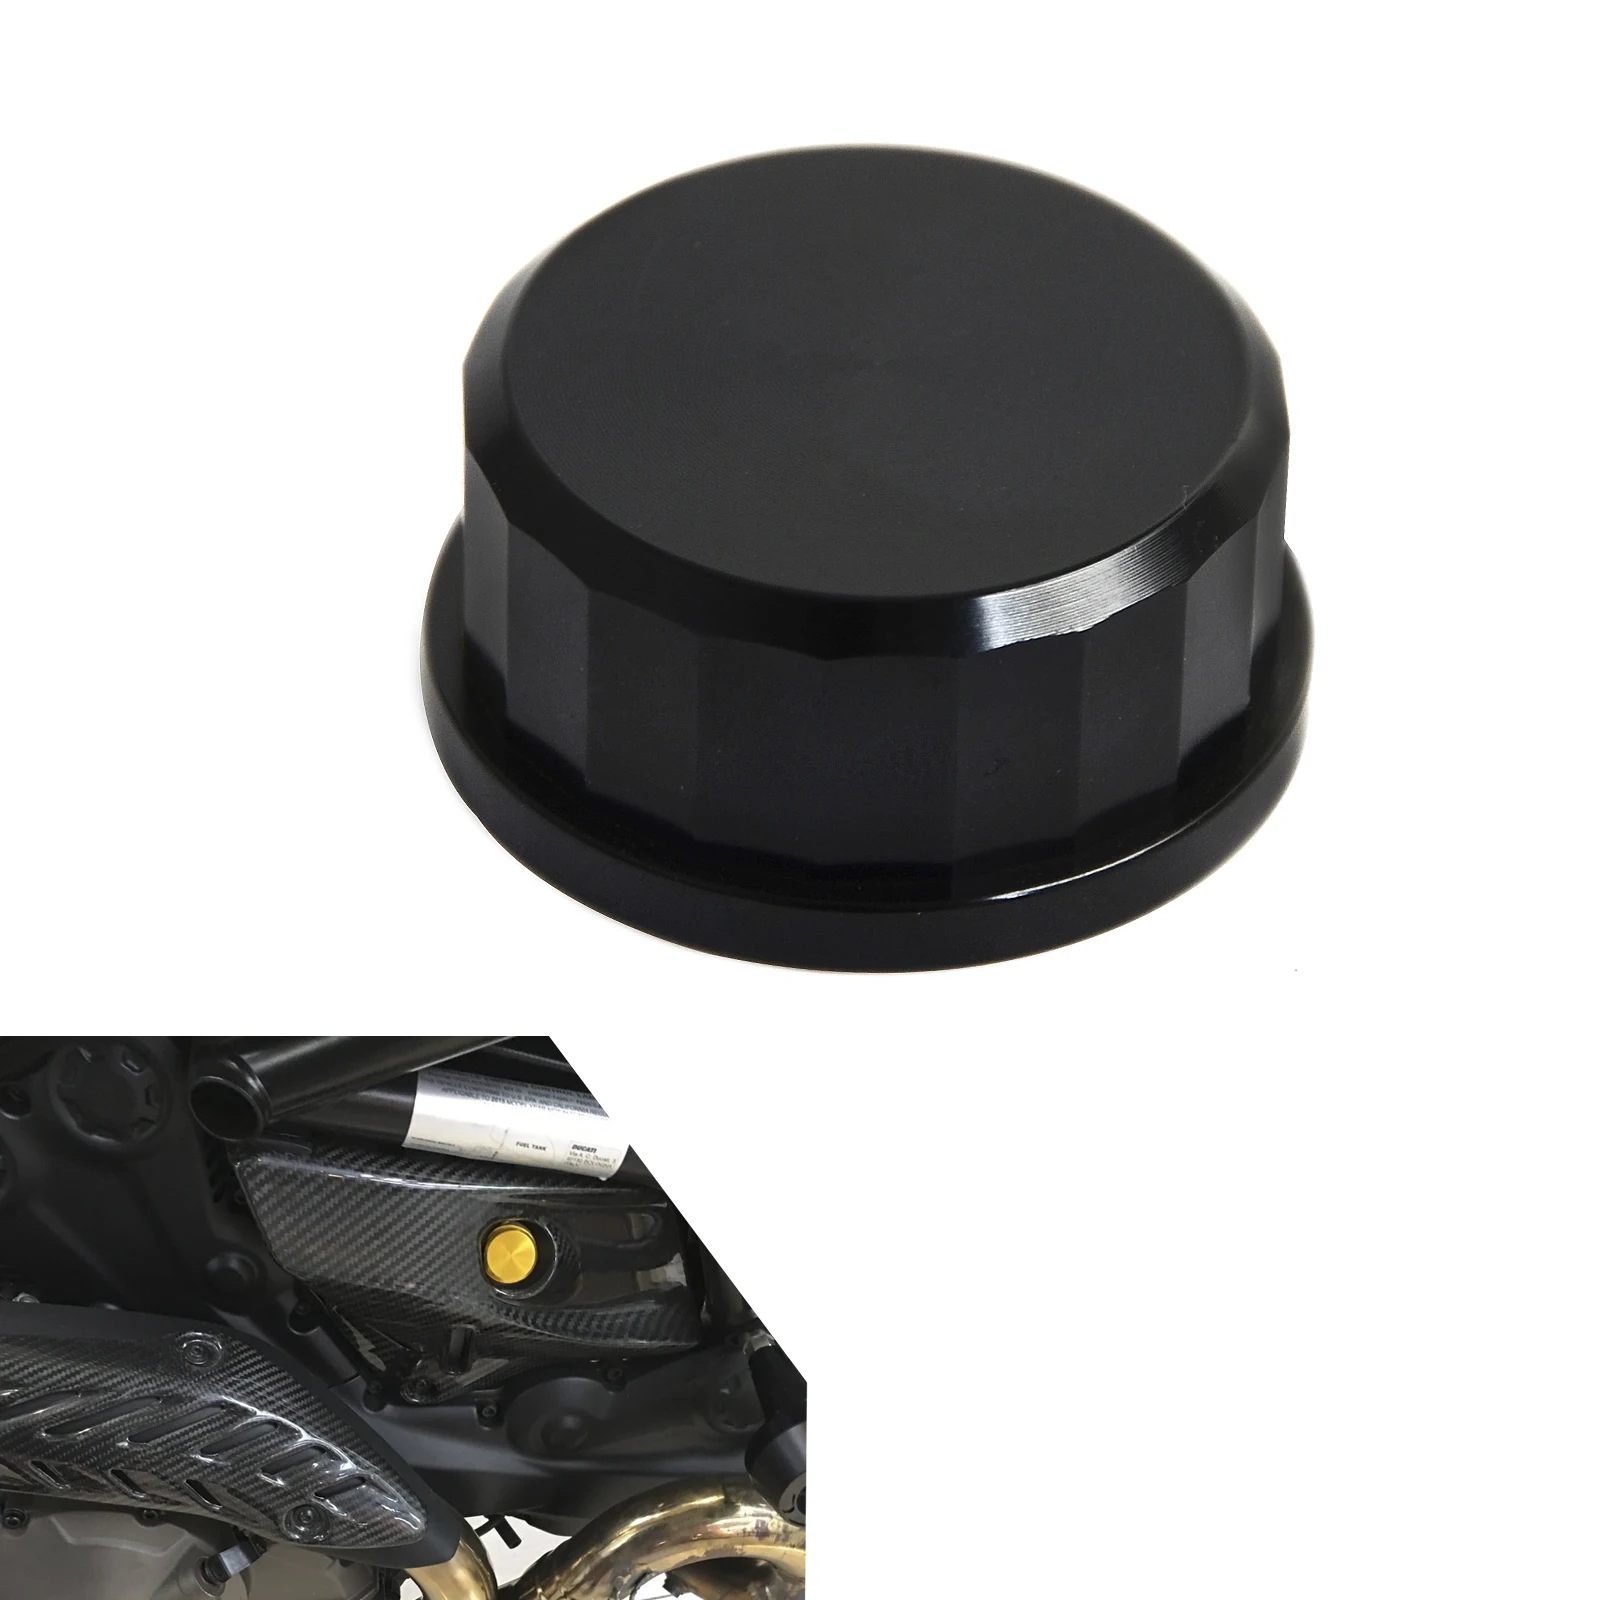 

Motorcycle Water Tank Cap For Ducati 1198 1199 1299 899 959 Panigale V4 Hypermotard 821 939 Monster 1200 Multistrada 1260S 950